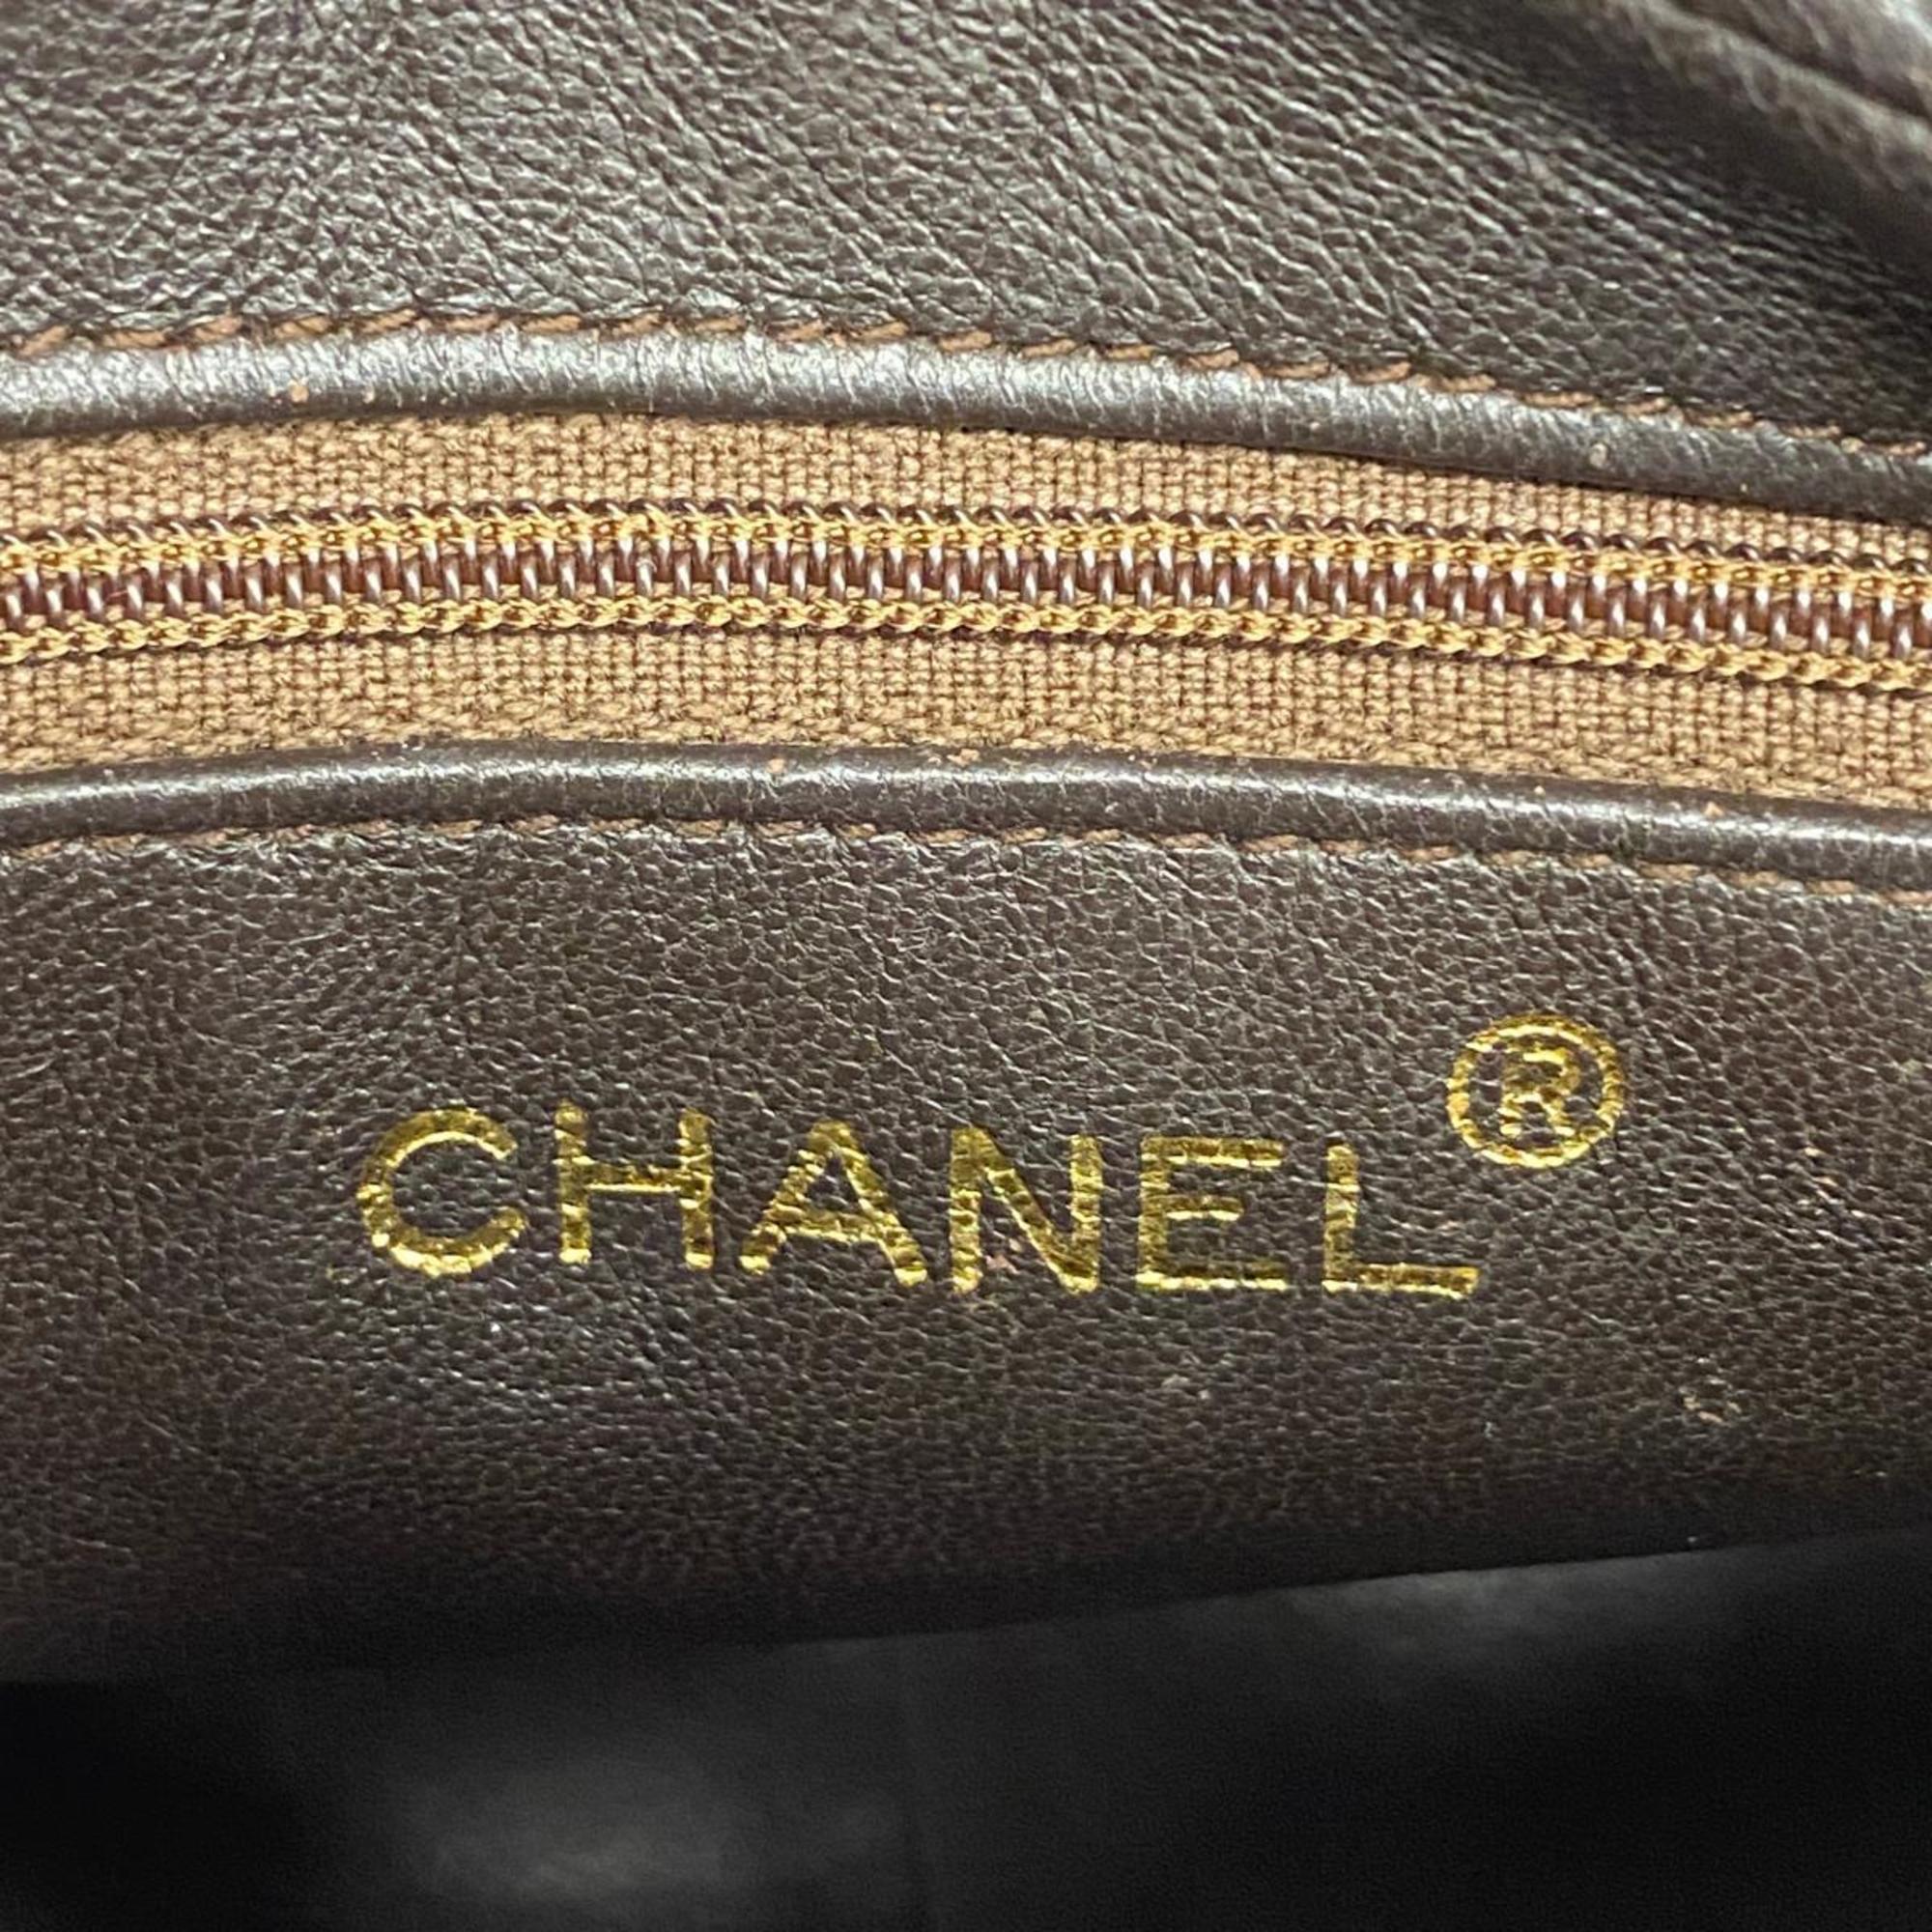 Chanel Shoulder Bag with Matelasse Suede Brown Women's